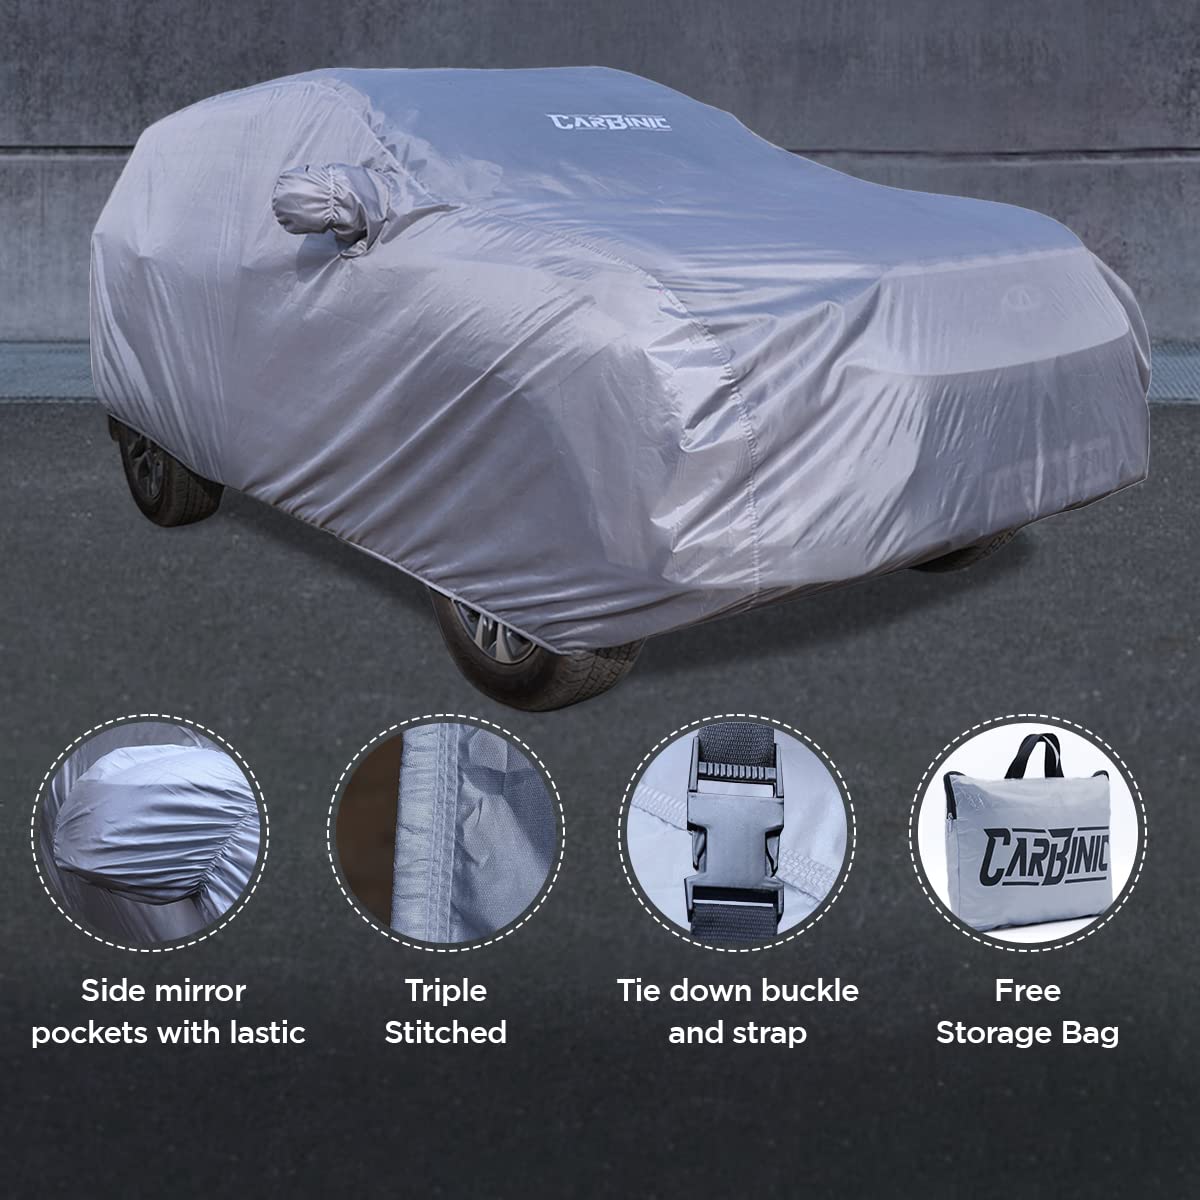 CarBinic Car Cover for Tata Nexon 2020 Water Resistant (Tested) and Du –  GlobalBees Shop